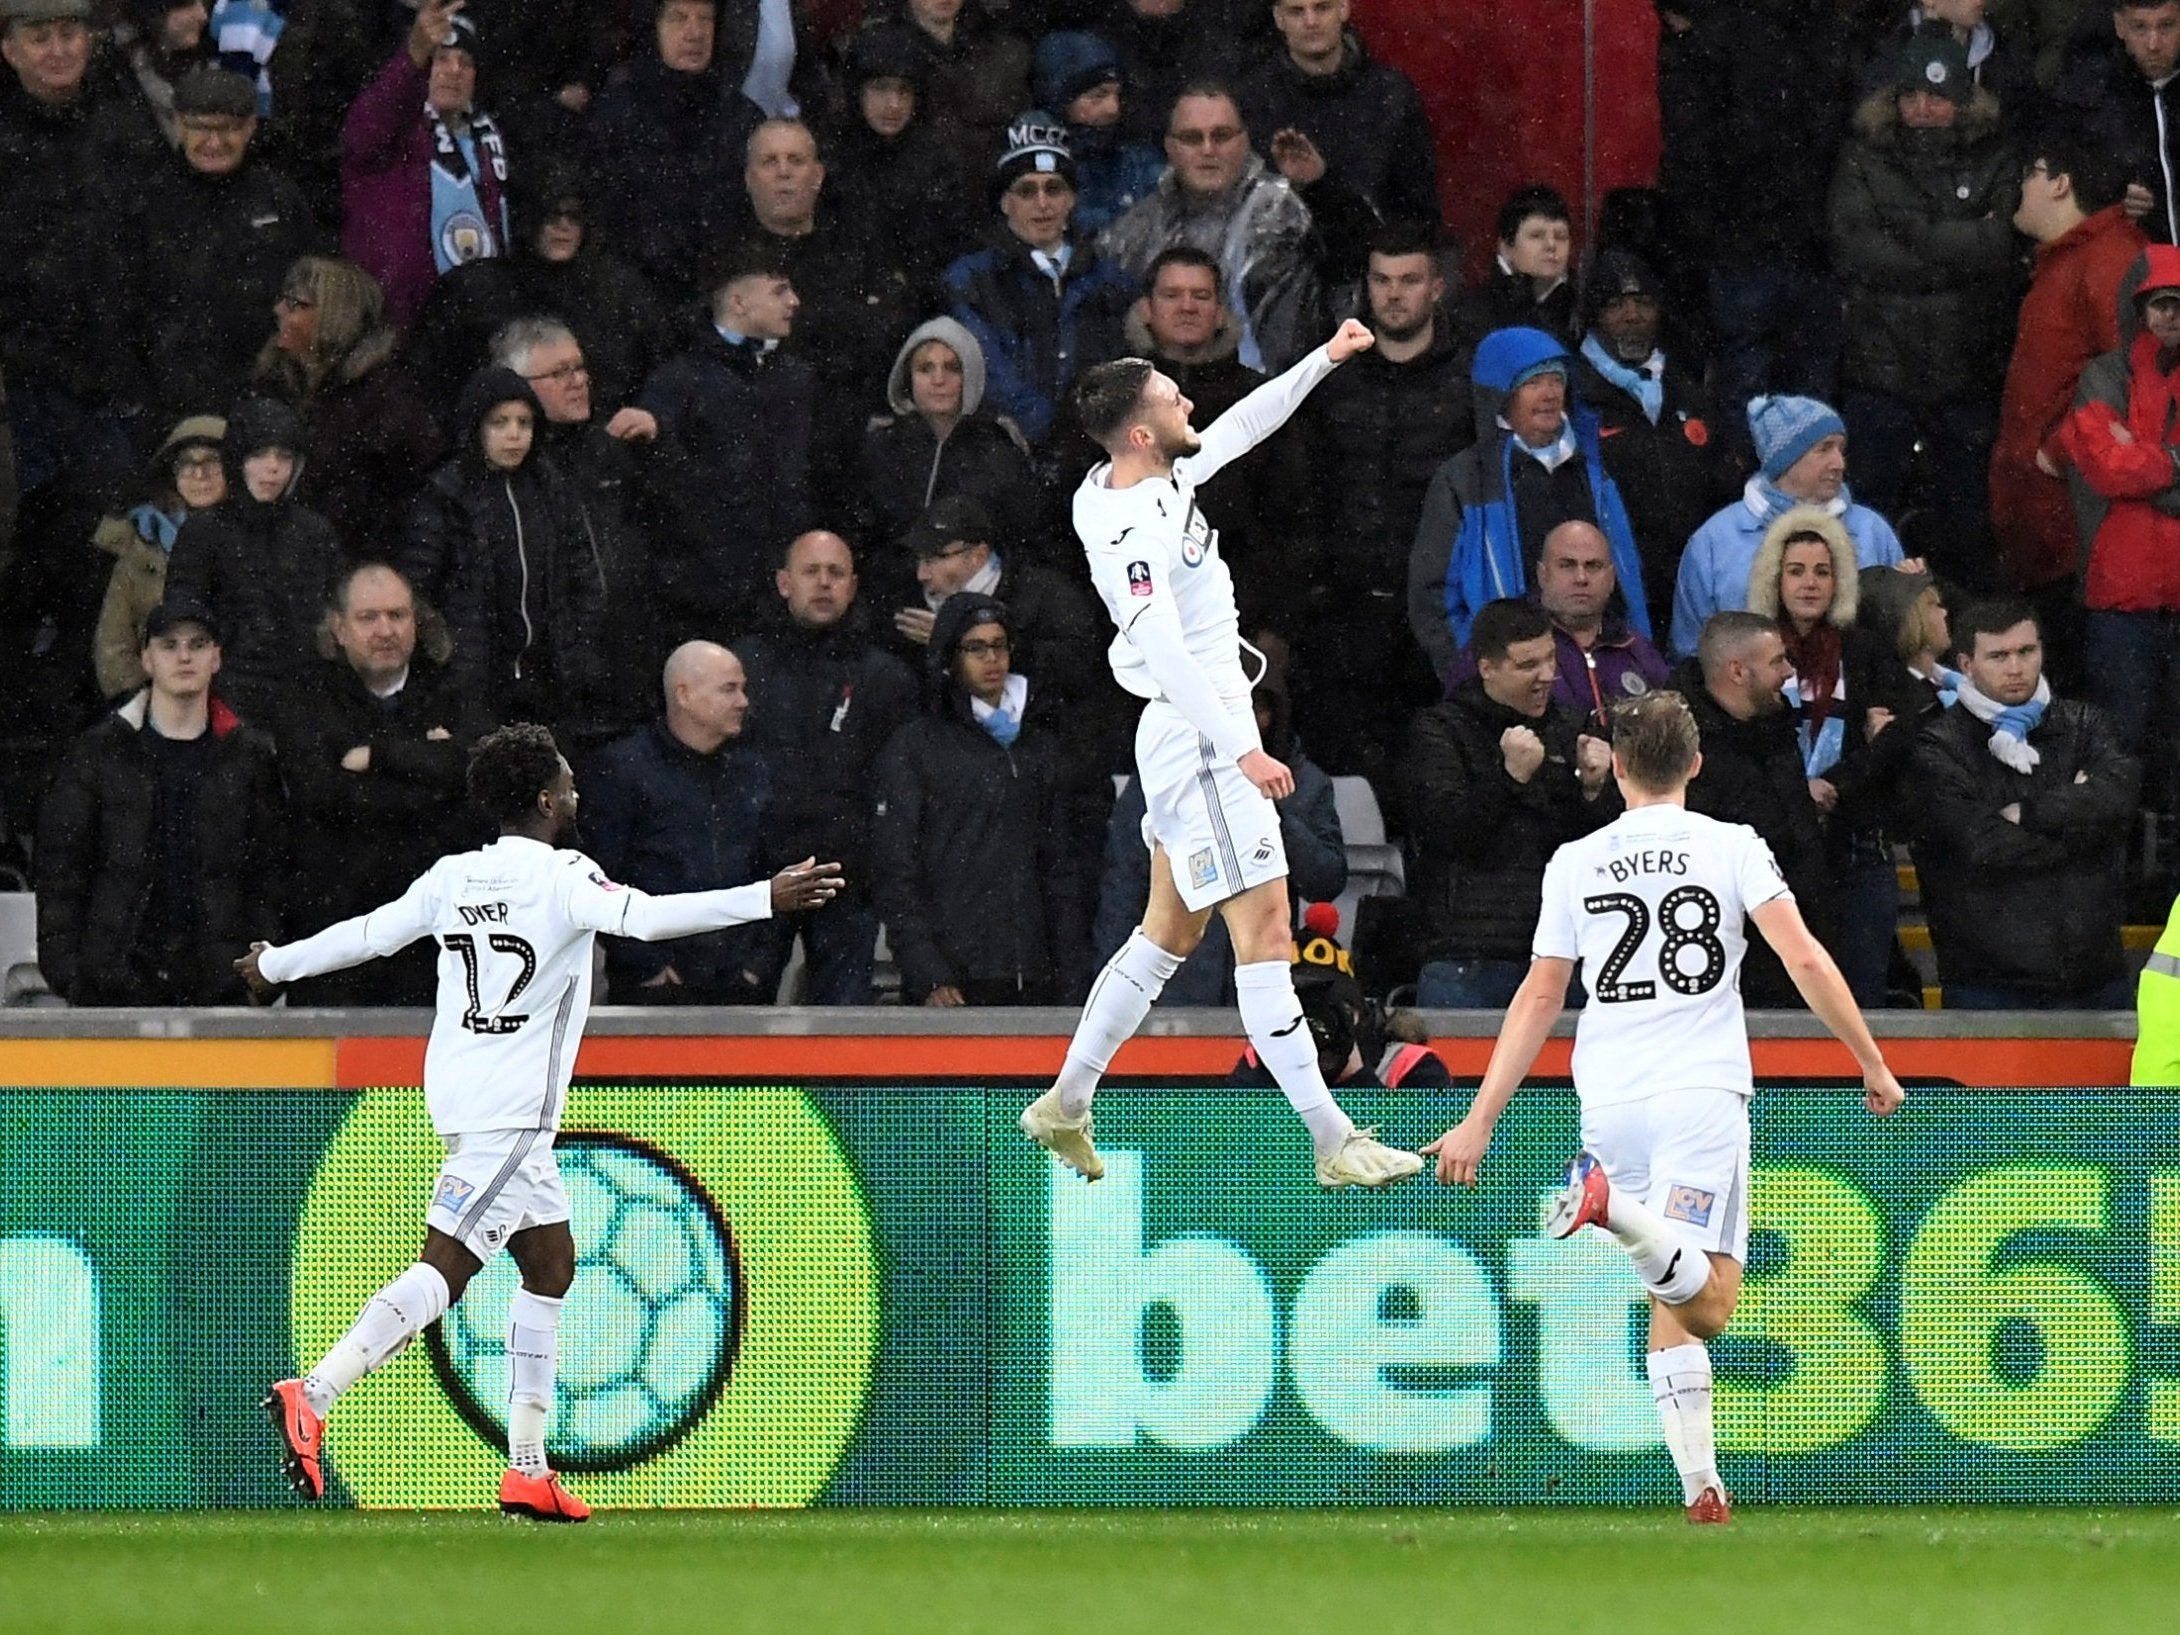 Swansea vs Man City, FA Cup LIVE: Stream, score, goals and latest updates from quarter-finals